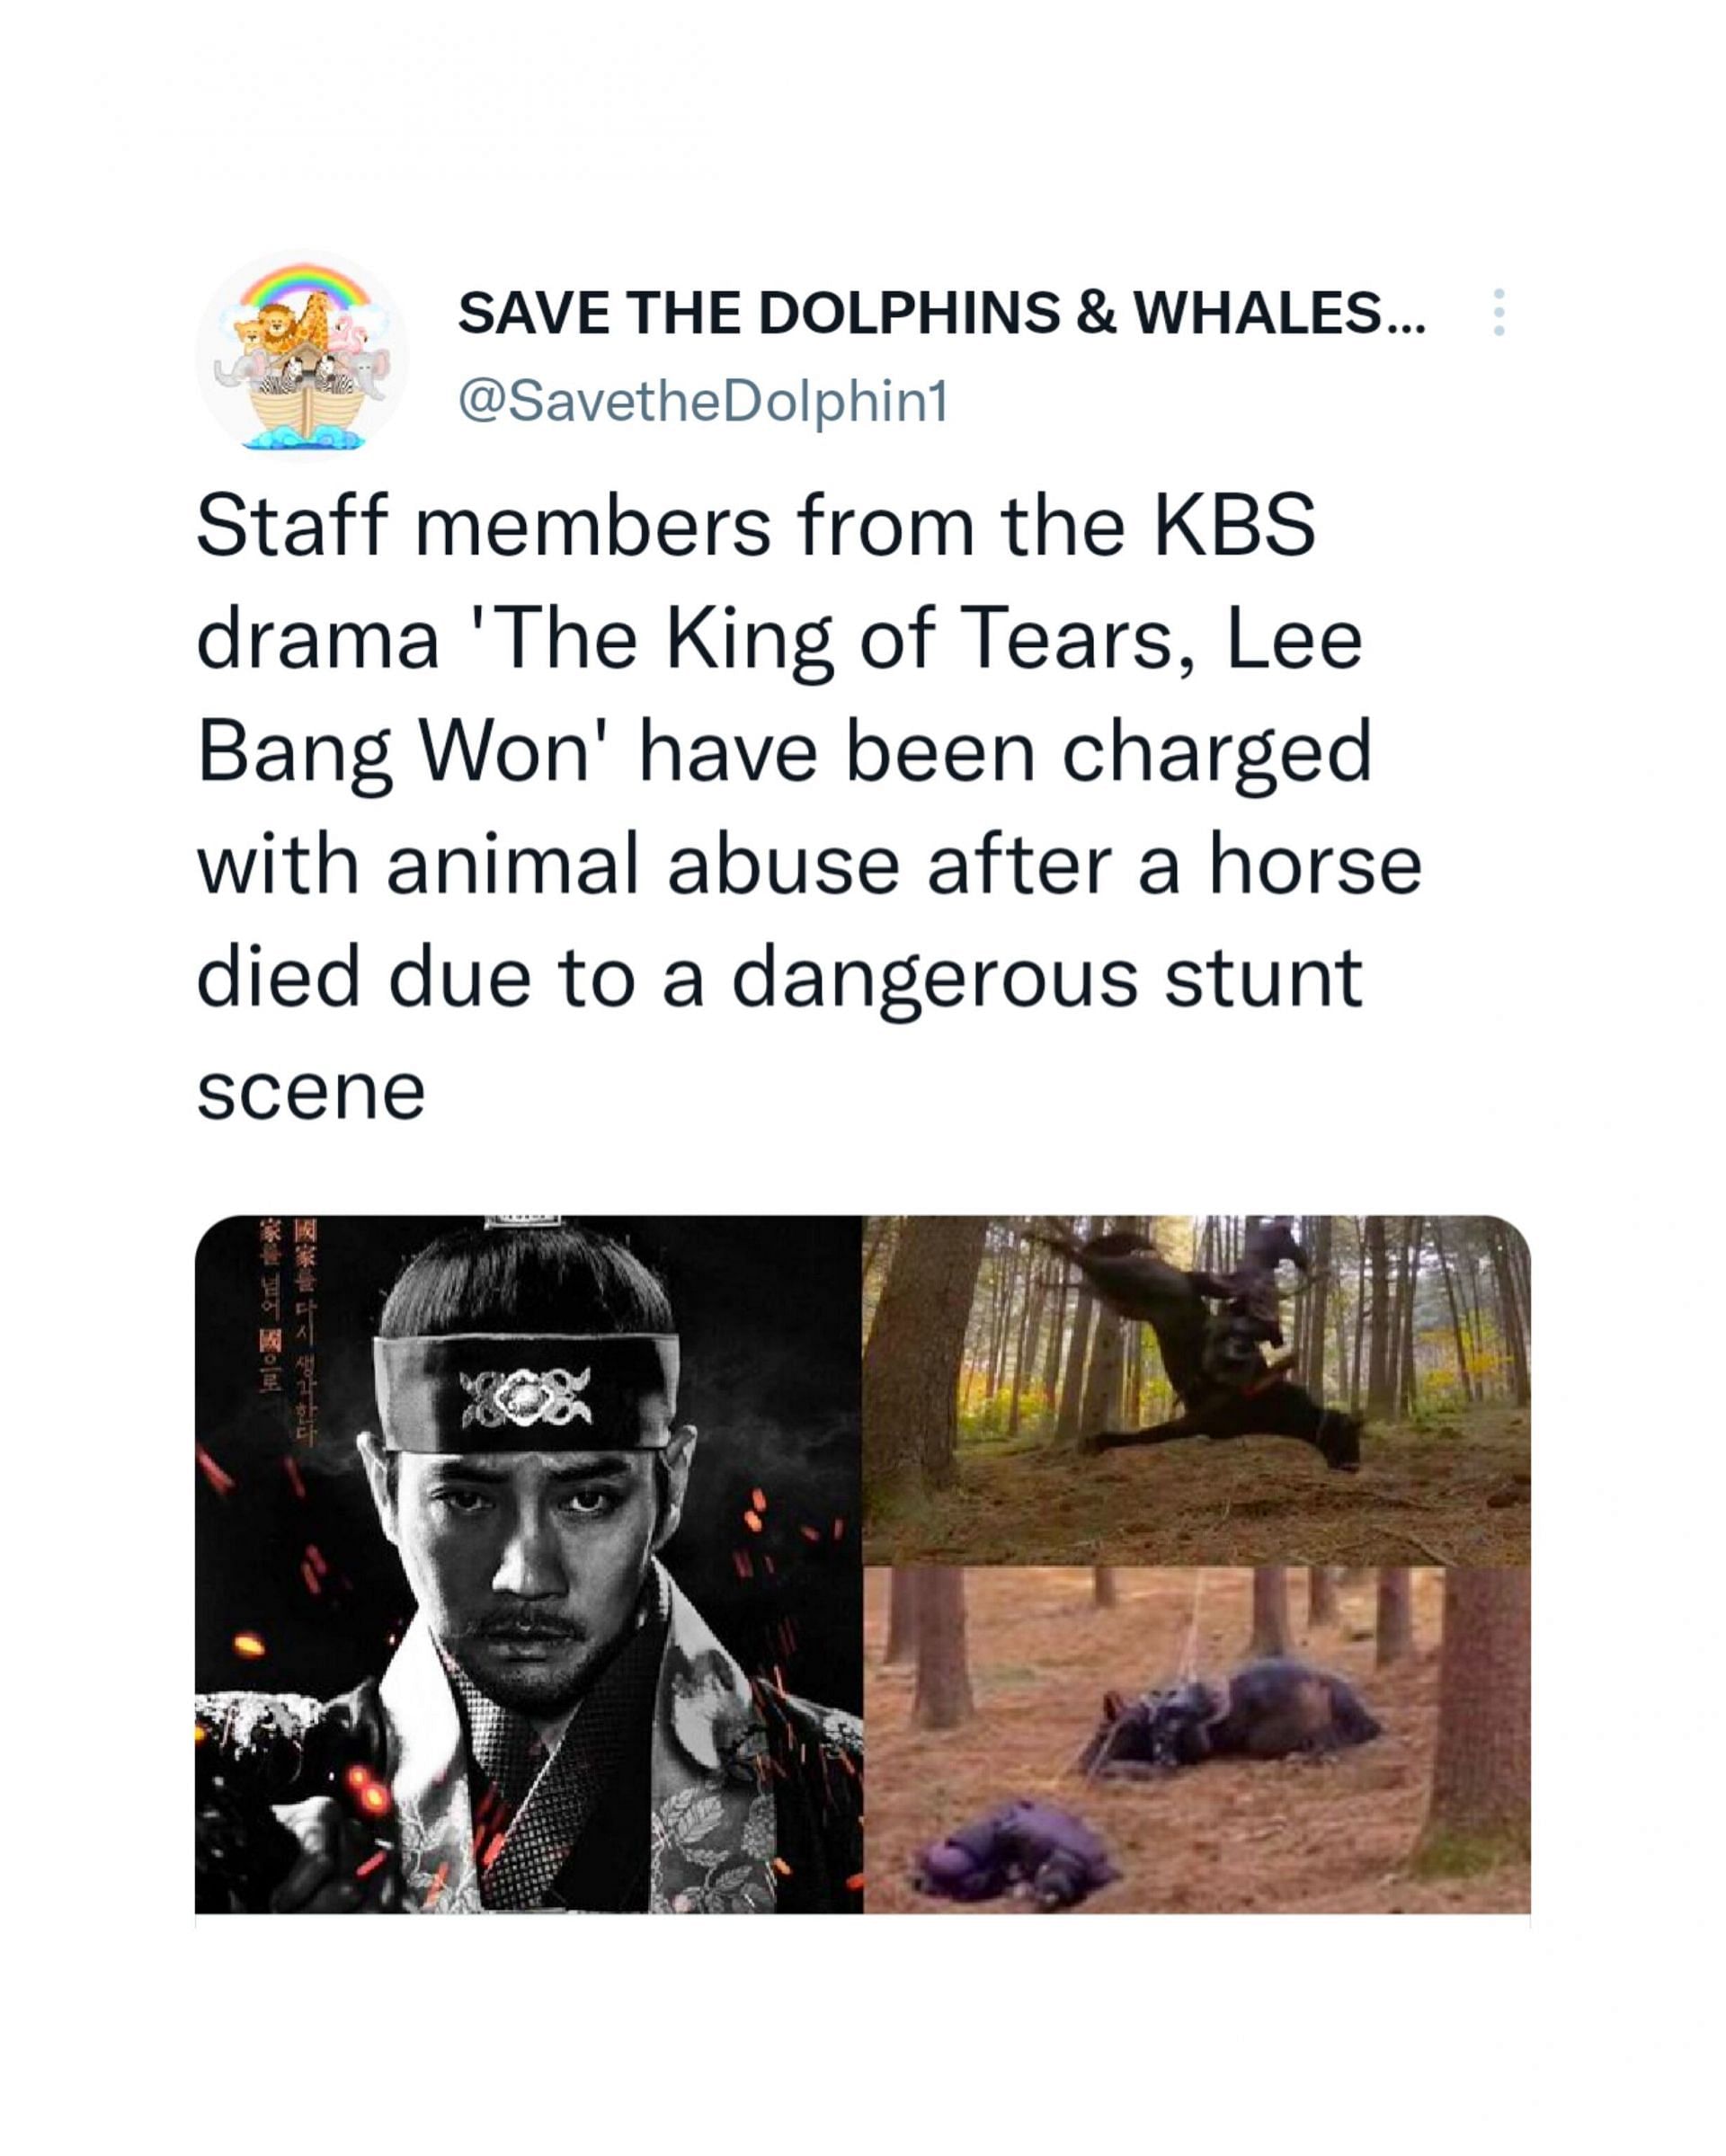 Staff members of KBS Drama 'The King of Tears, Lee Bang-won' charged with  animal abuse after a horse dies due to negligence